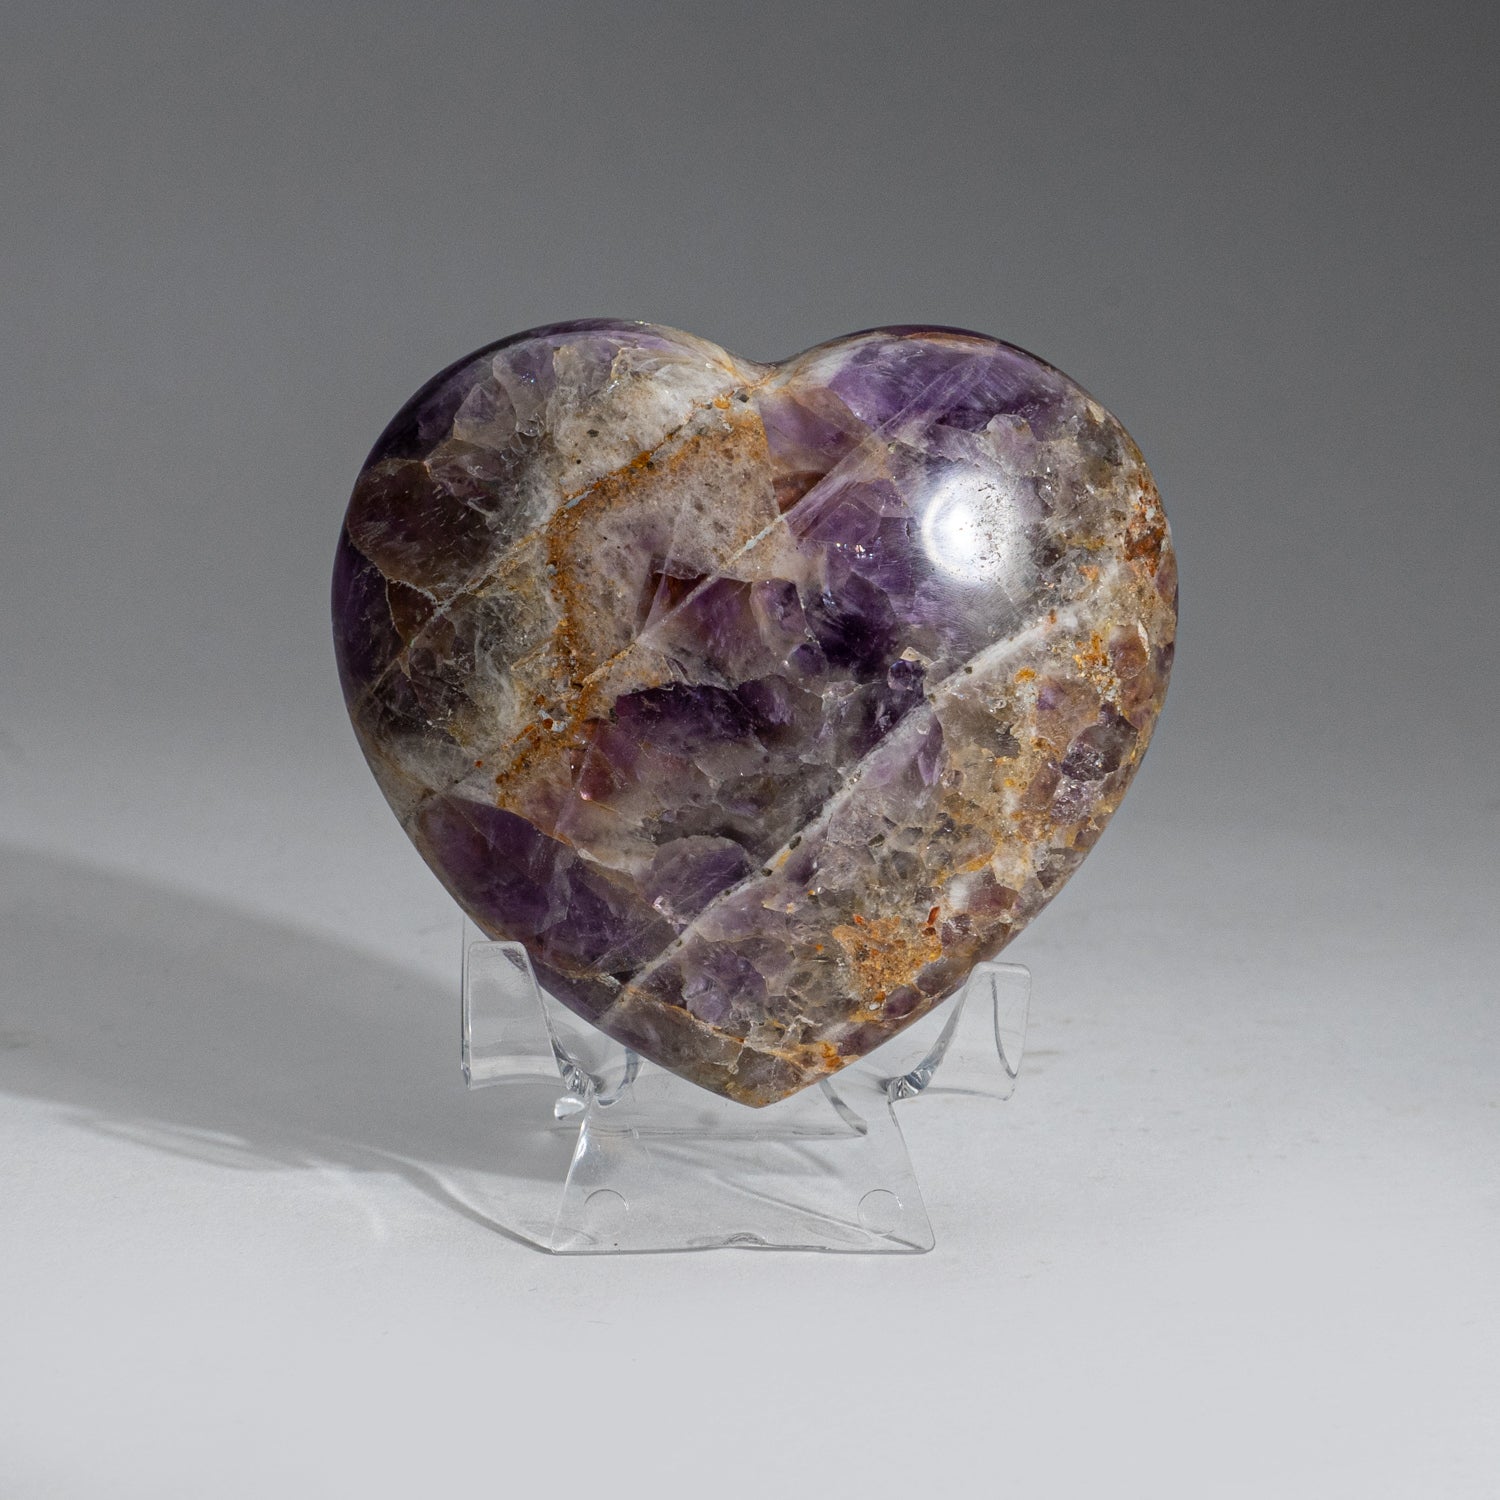 Polished Chevron Amethyst Small Heart from Brazil (335 grams)